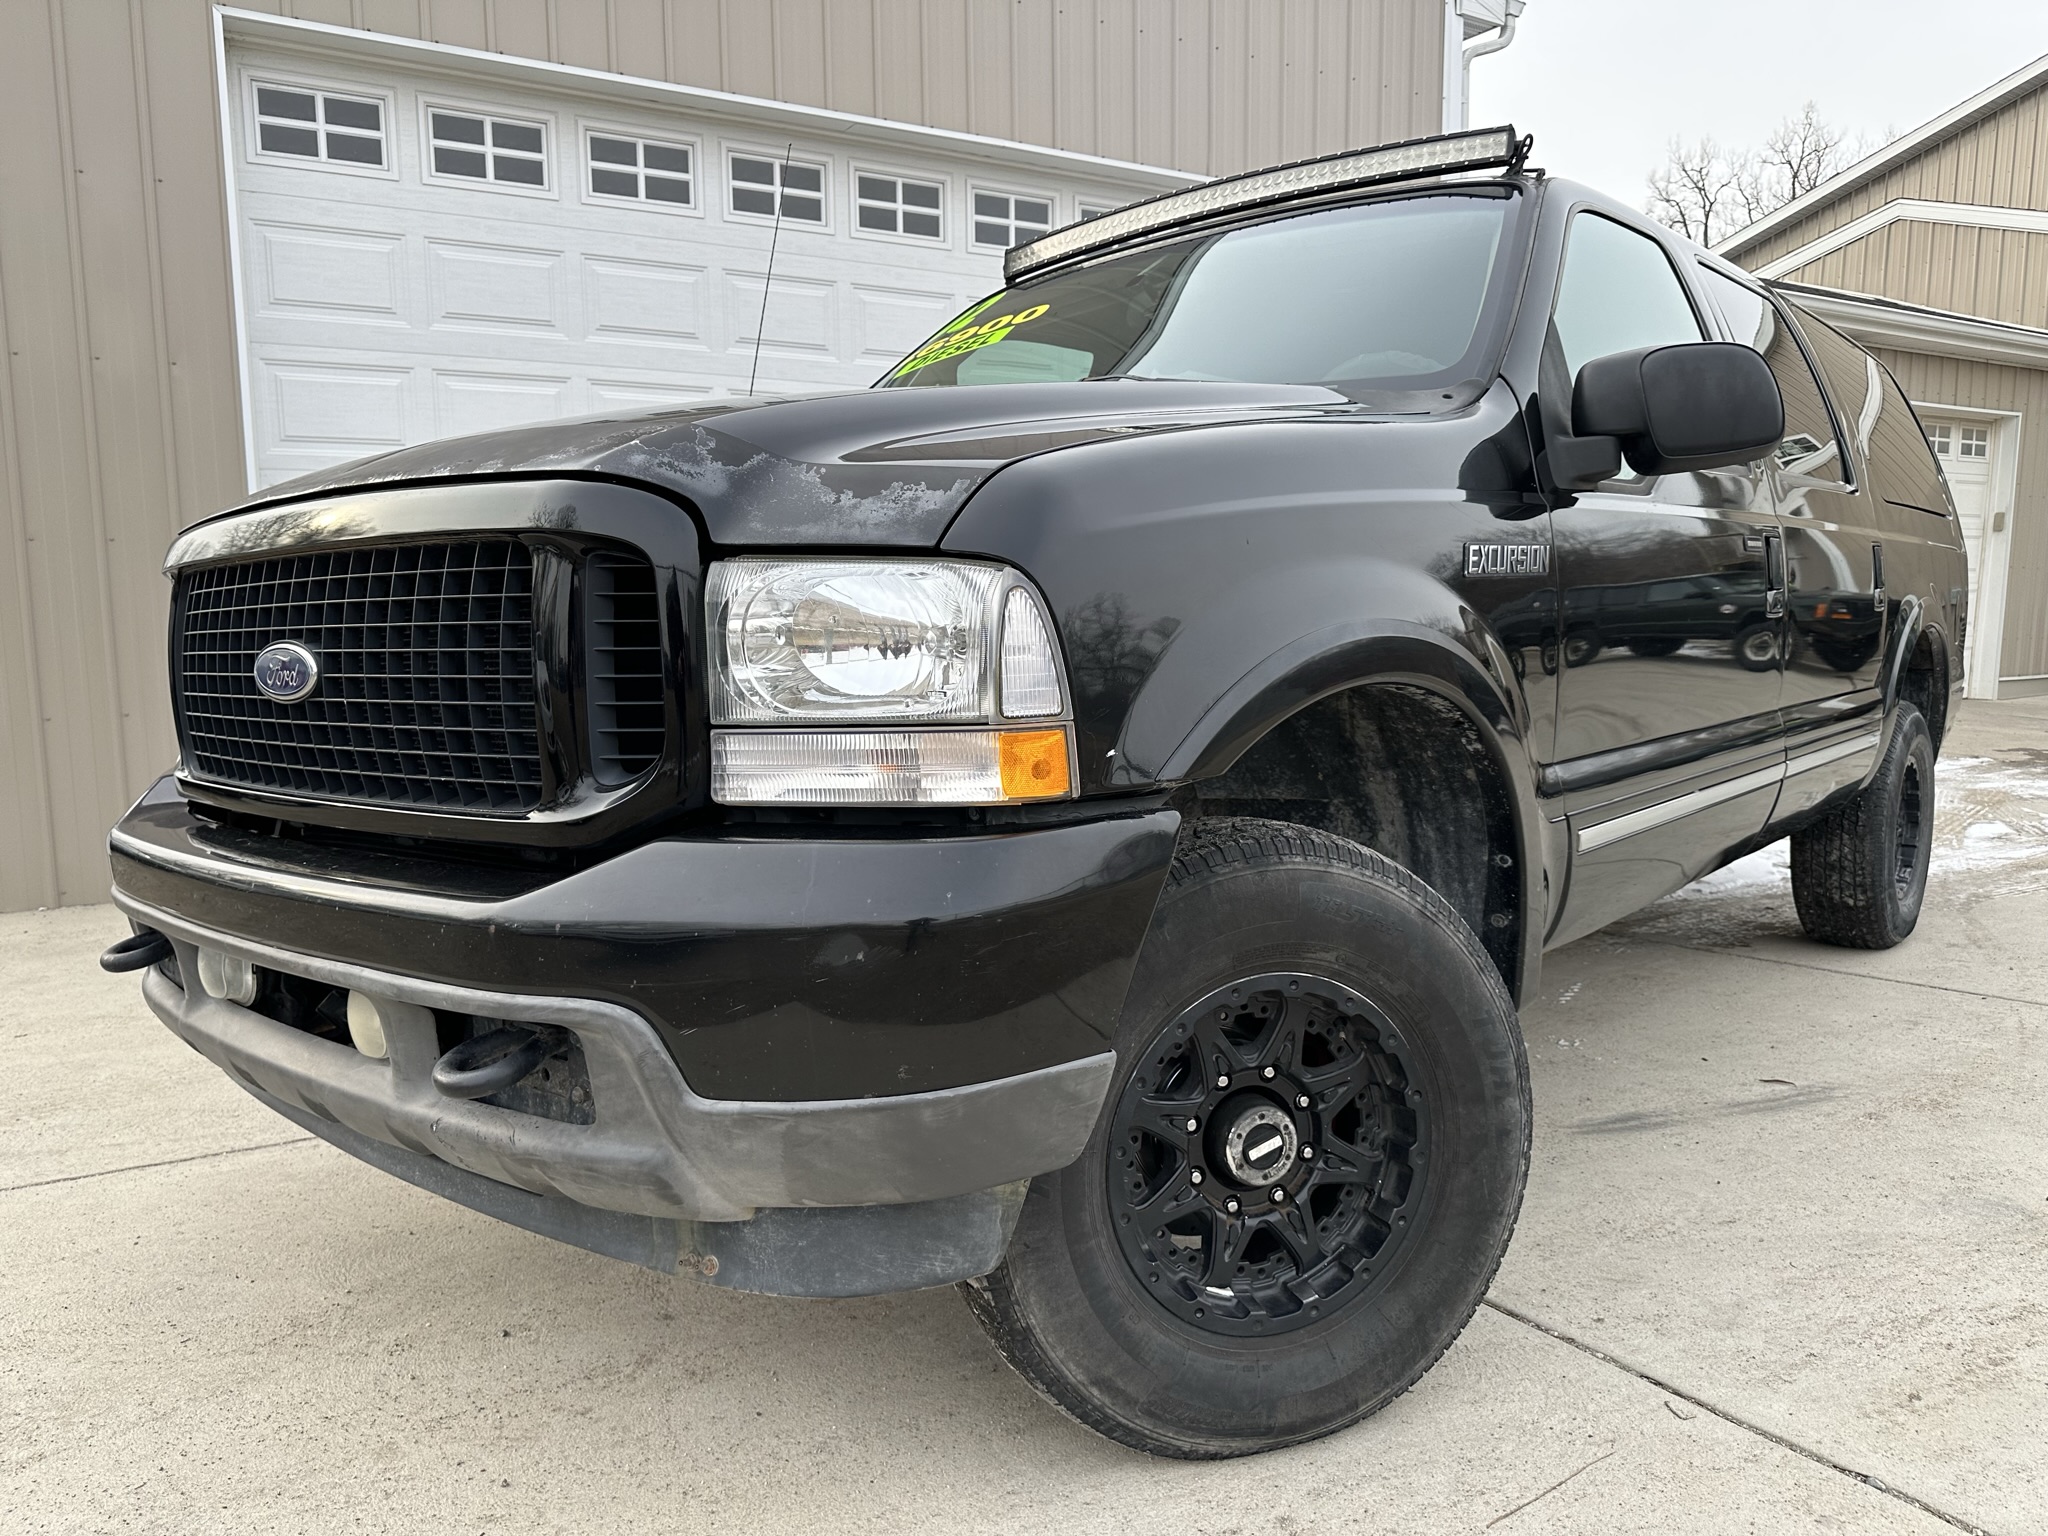 2002 Ford Excursion For Sale